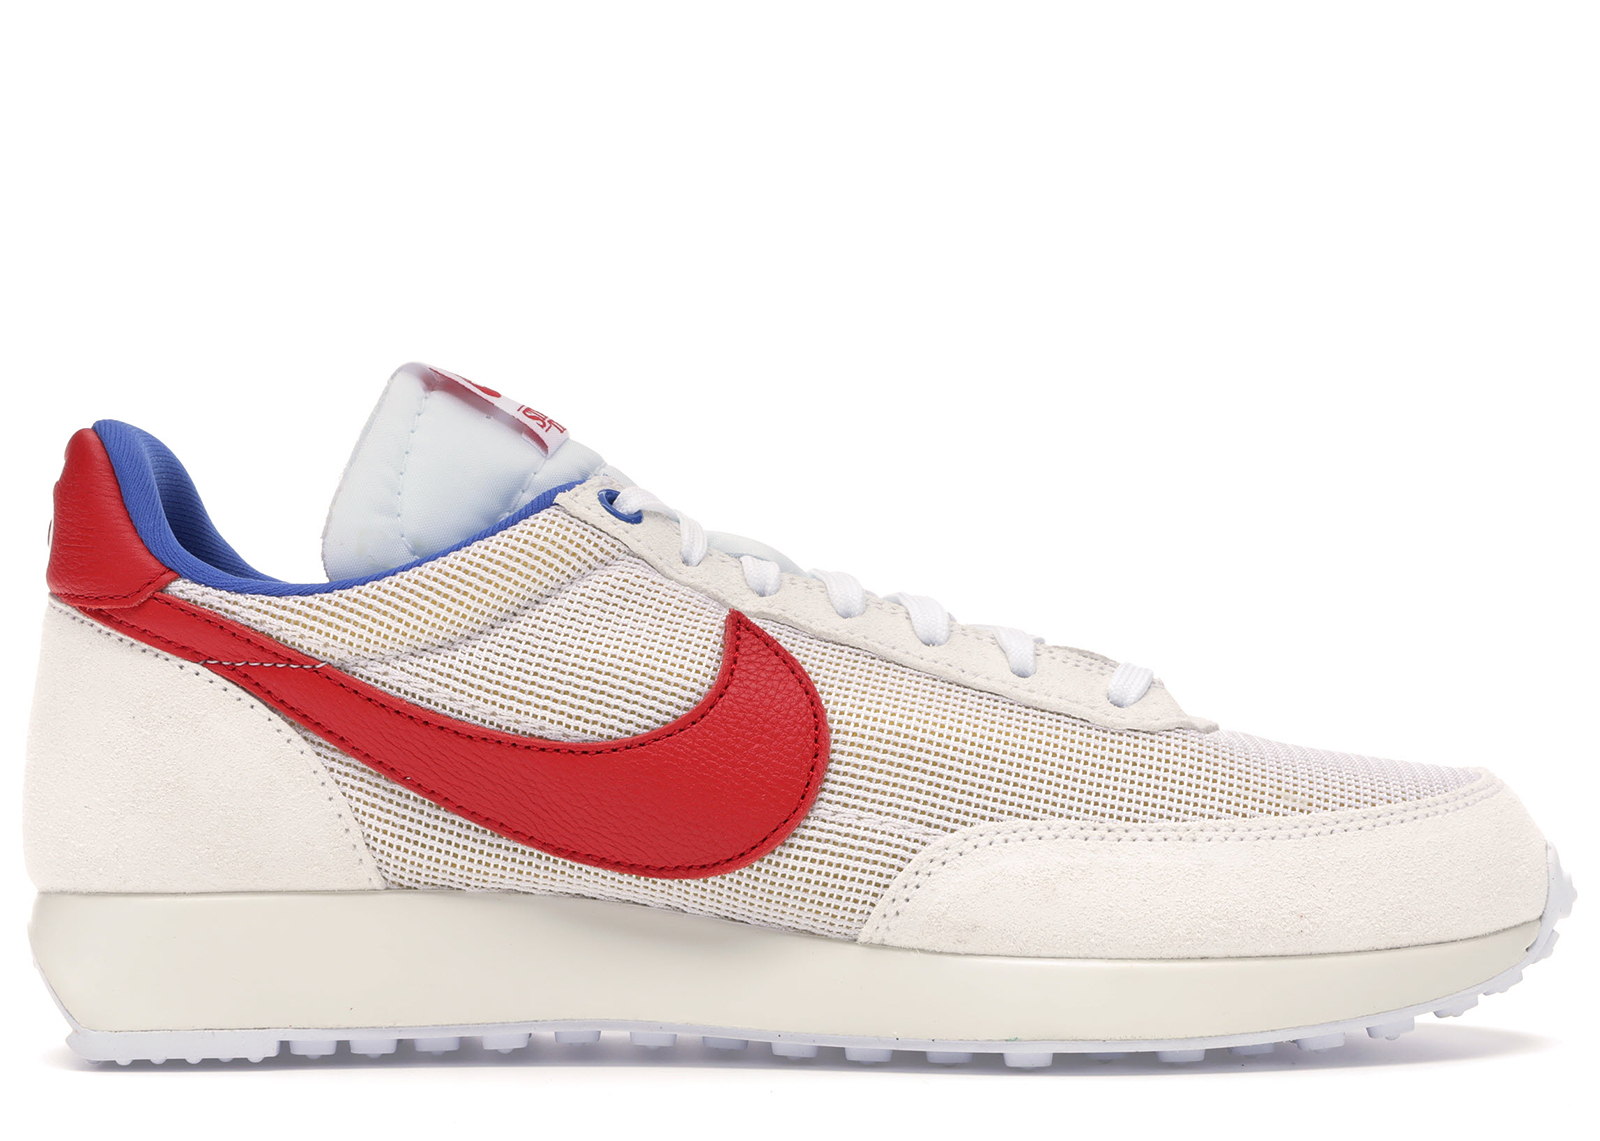 Nike Tailwind 79 Stranger Things Independence Day Pack